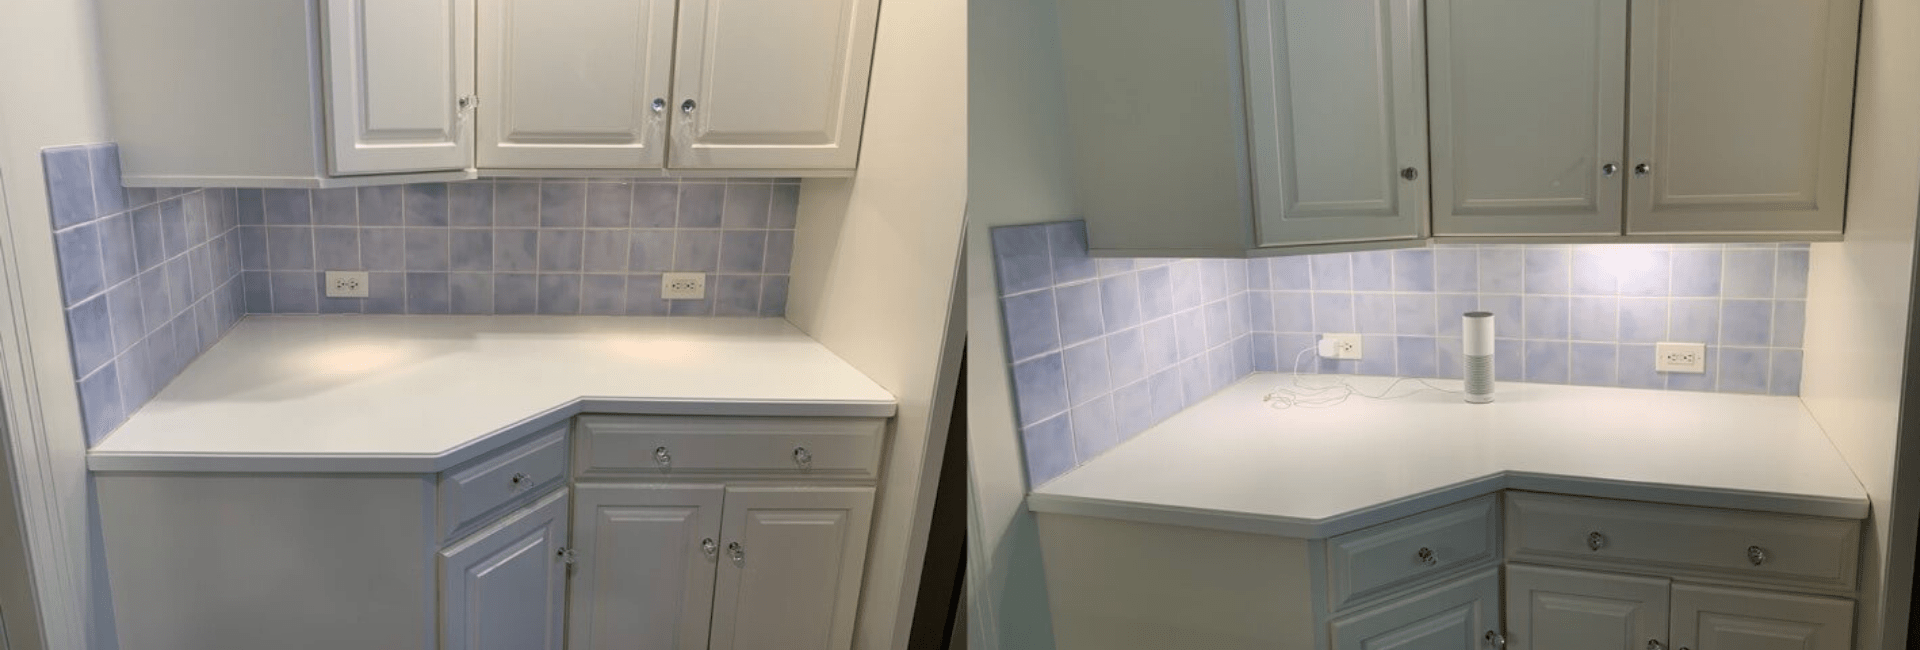 OLED Light Panels Transform Kitchen Space with Under Cabinet Light Replacement